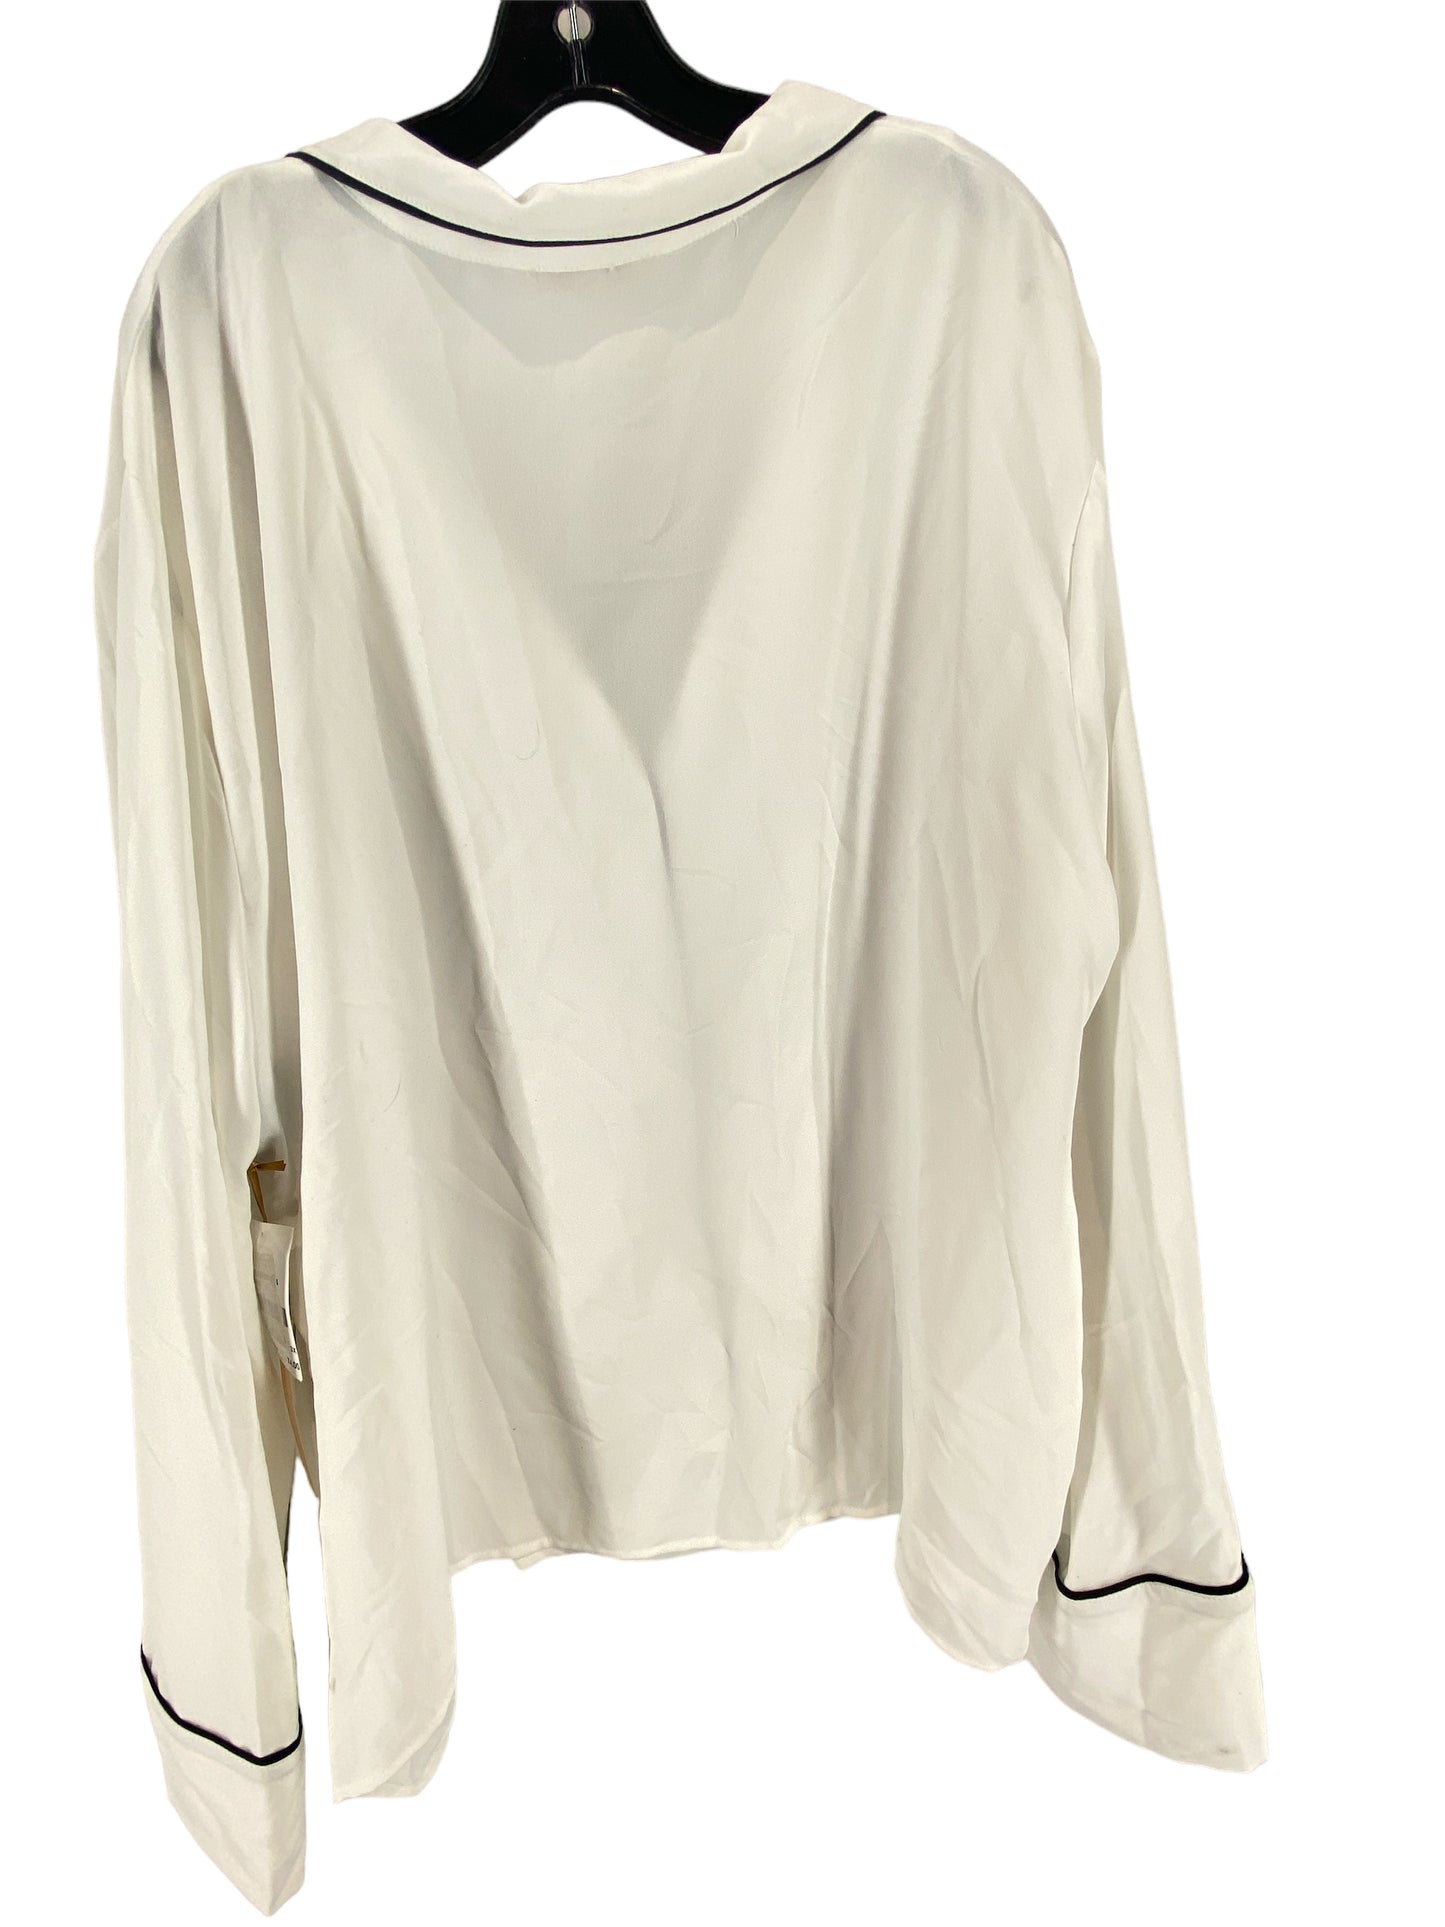 Blouse Long Sleeve By Gibson And Latimer  Size: 3x